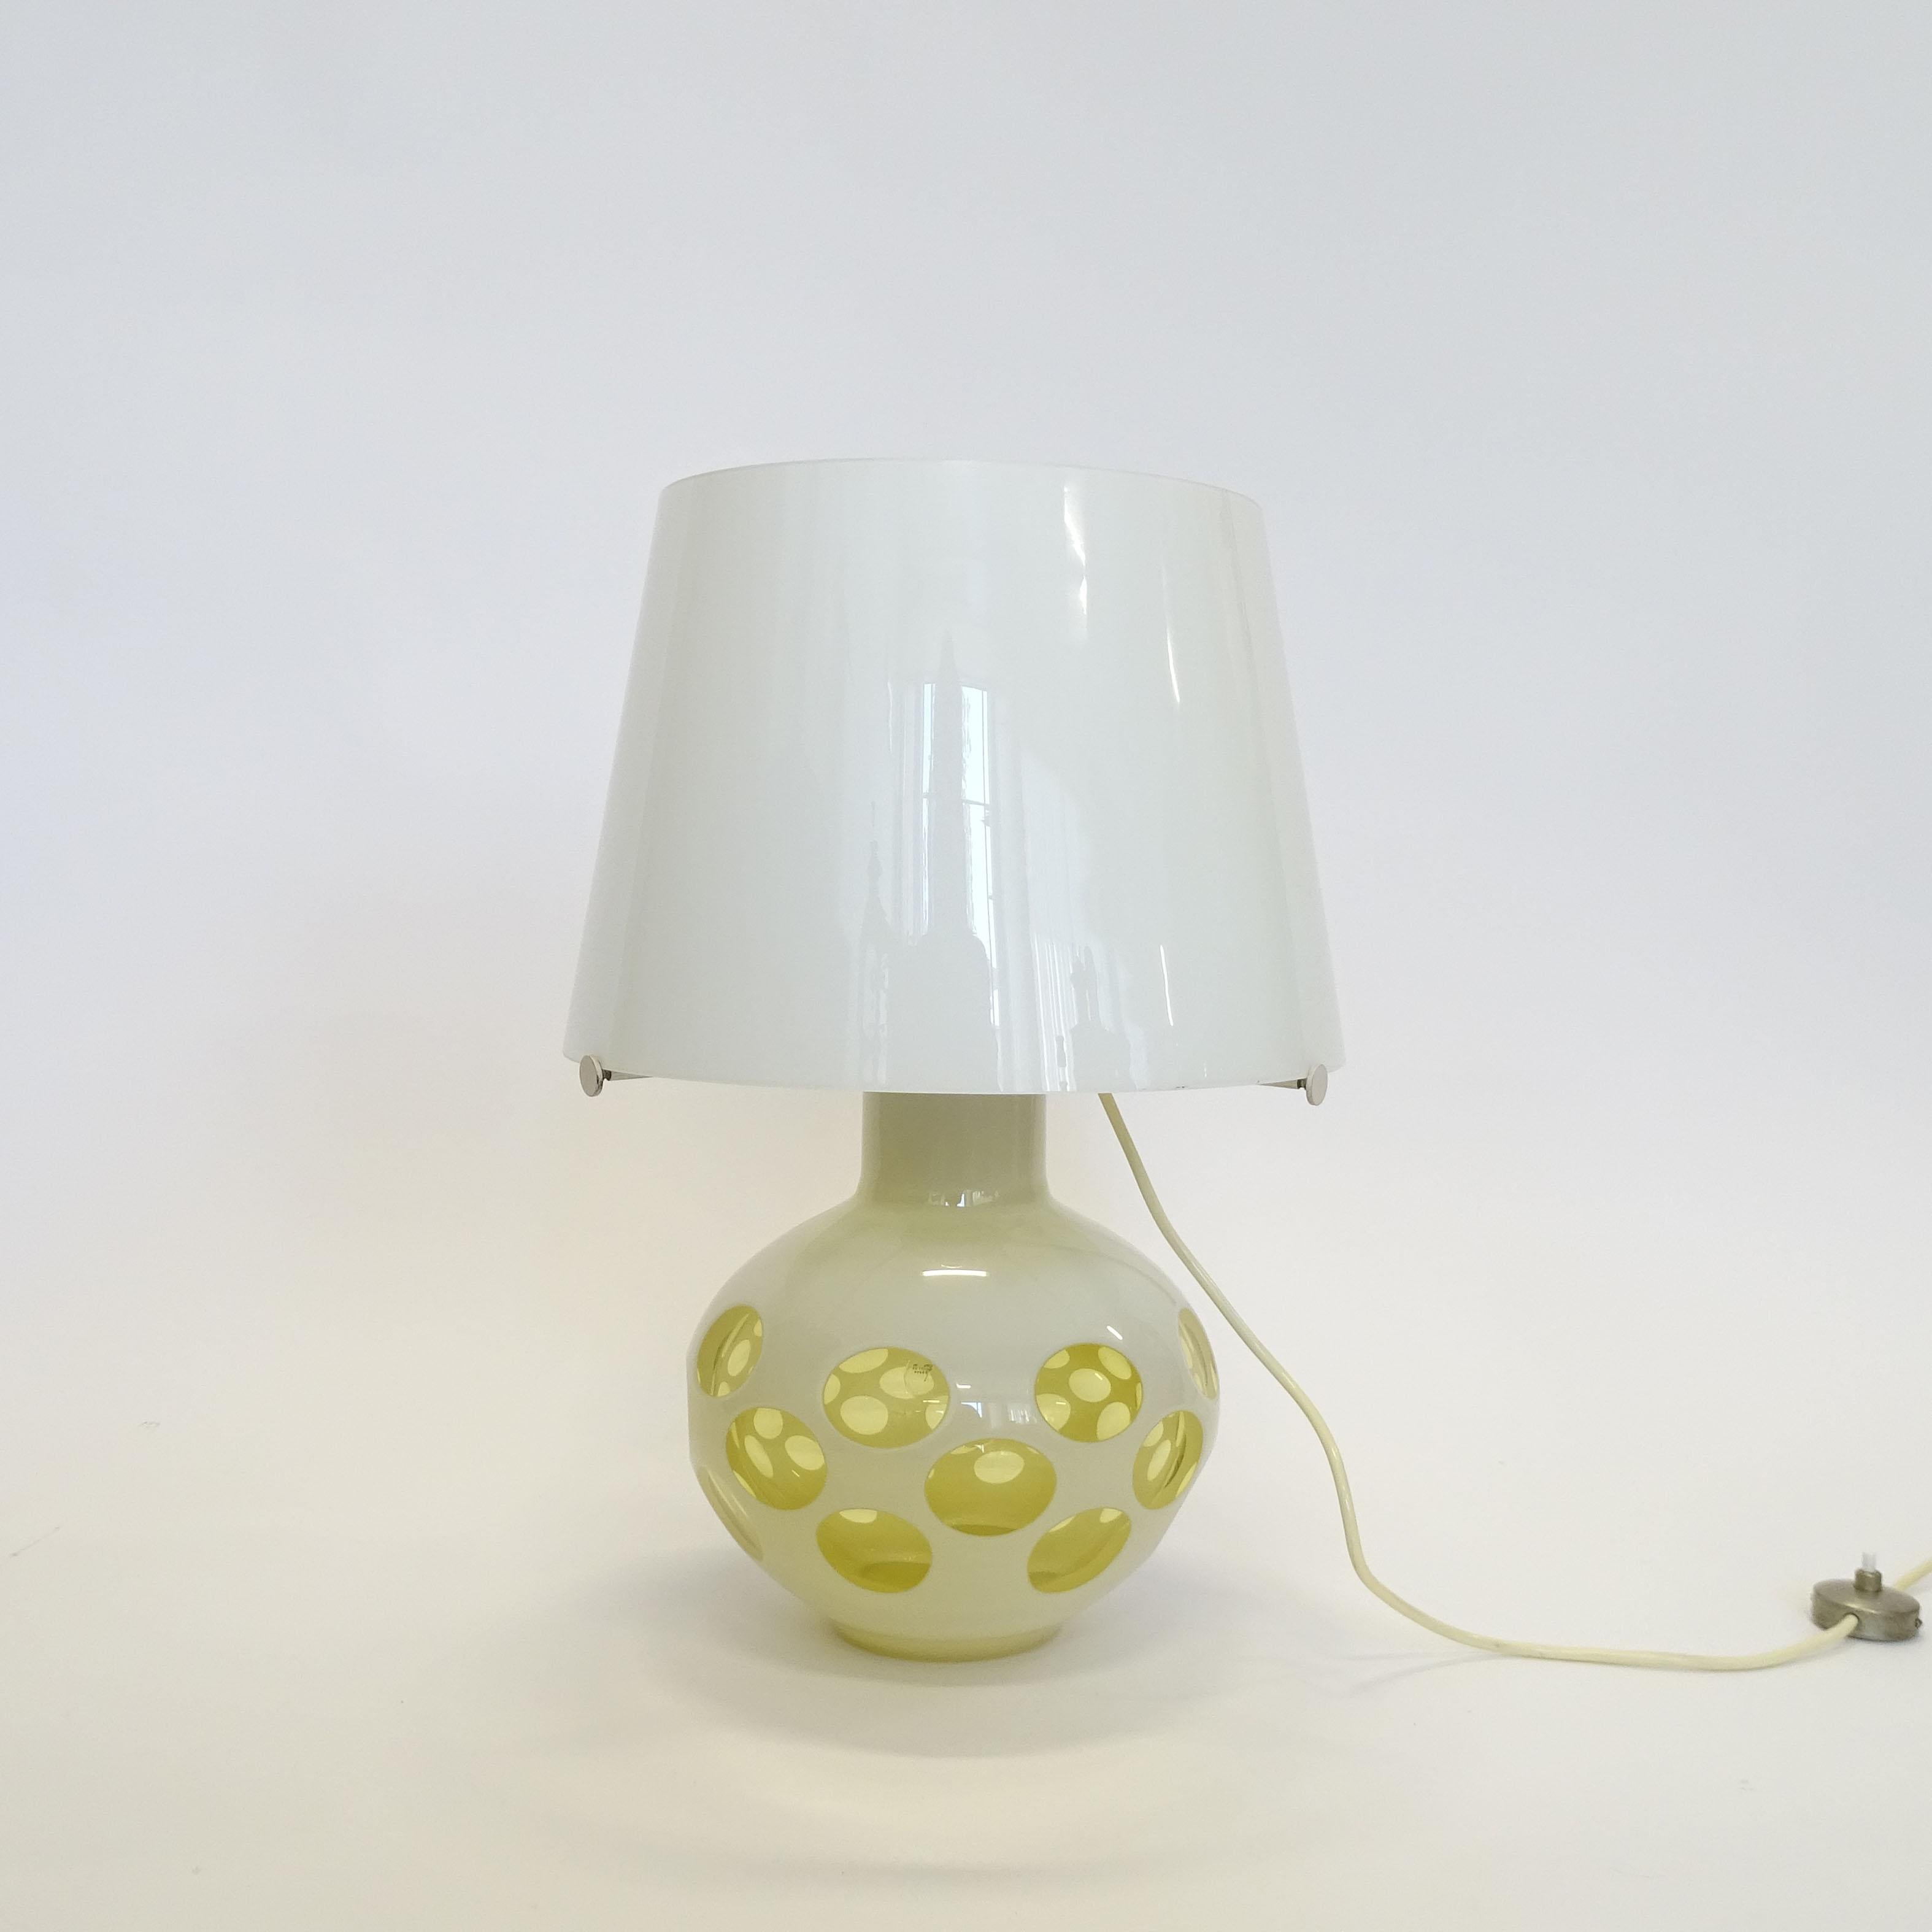 Carlo Nason light yellow murano glass table lamp for Mazzega.
Italy 1970s
The lampshade is also in Murano glass.

